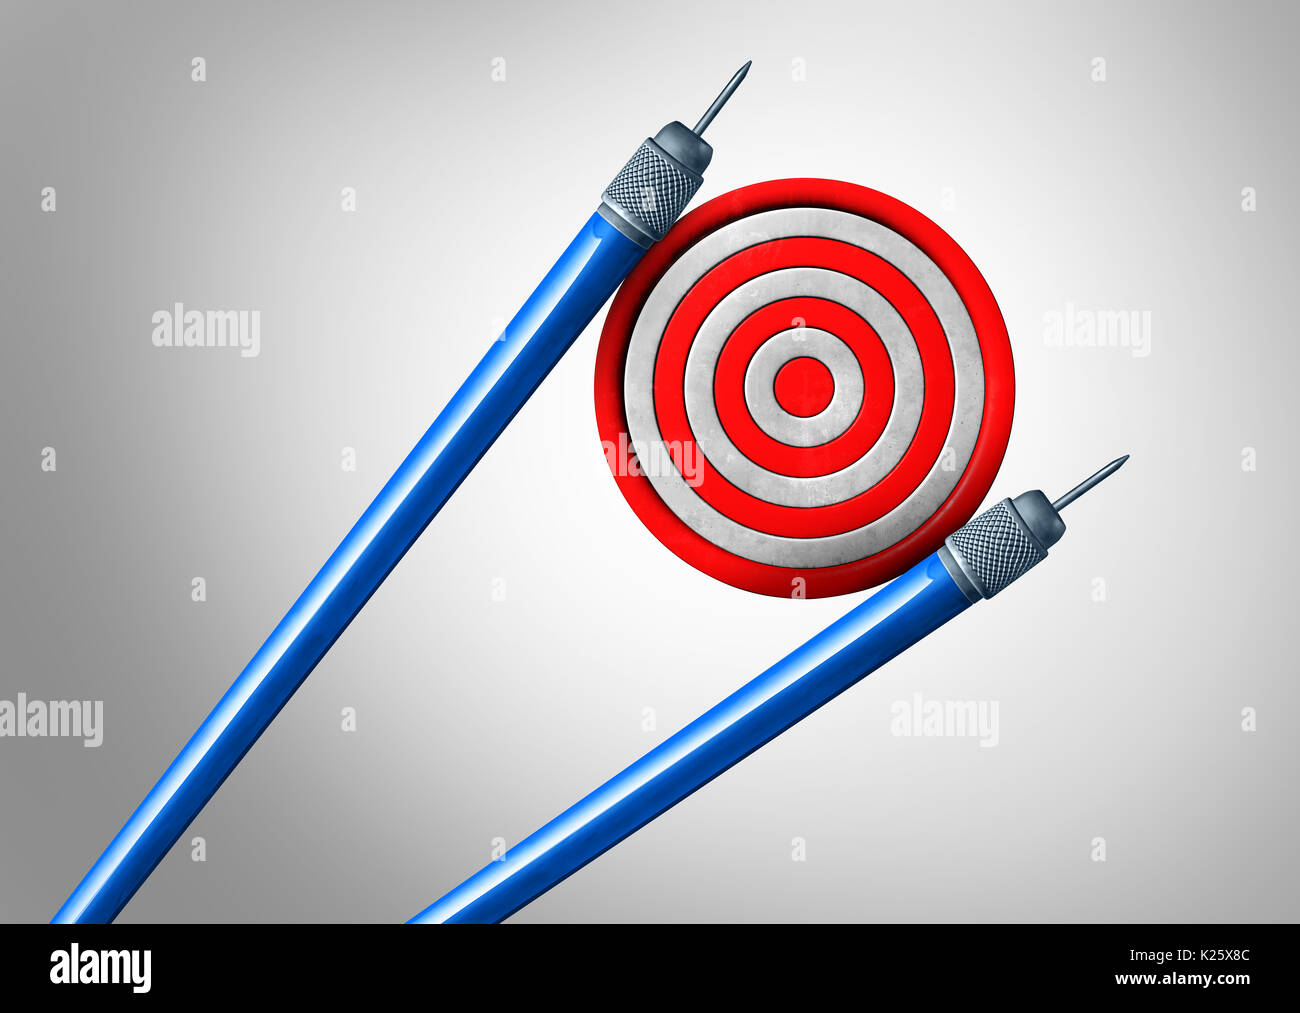 Asian business and strategy as an asia pacific trade concept and economic goal idea as darts shaped as chopsticks holding a target as a China Japan. Stock Photo